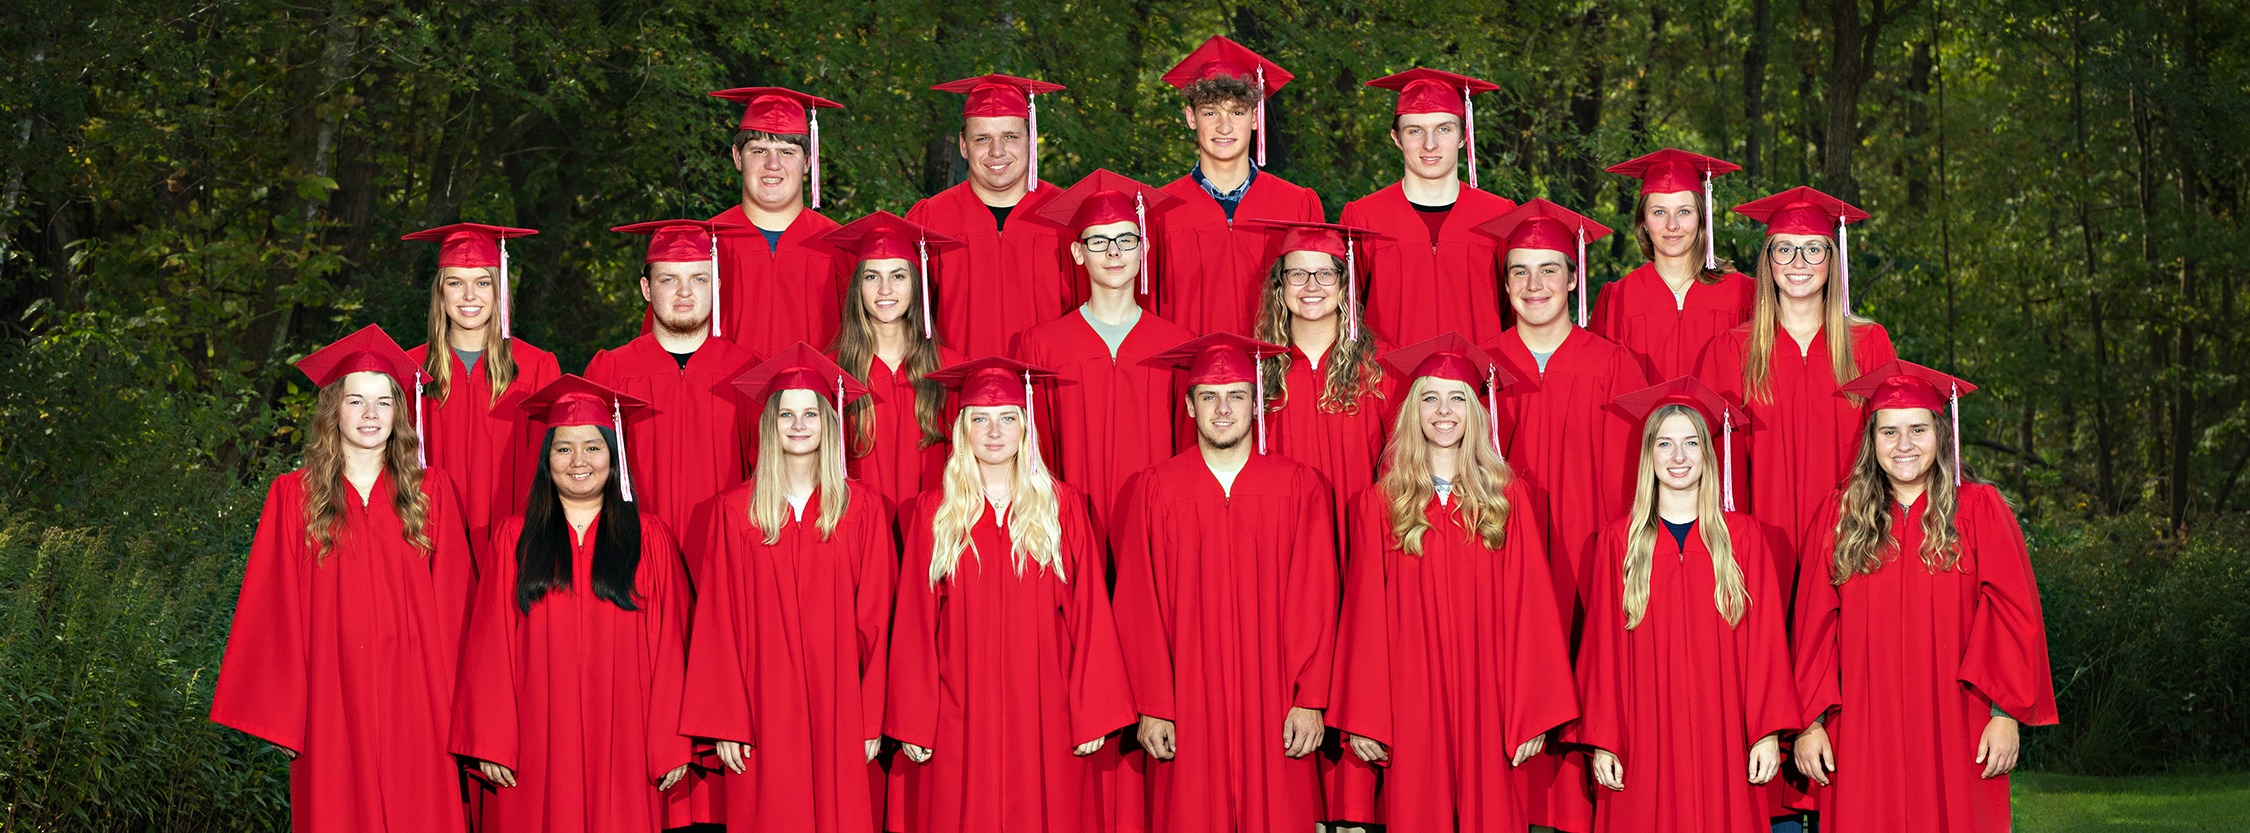 students standing in cap and gowns